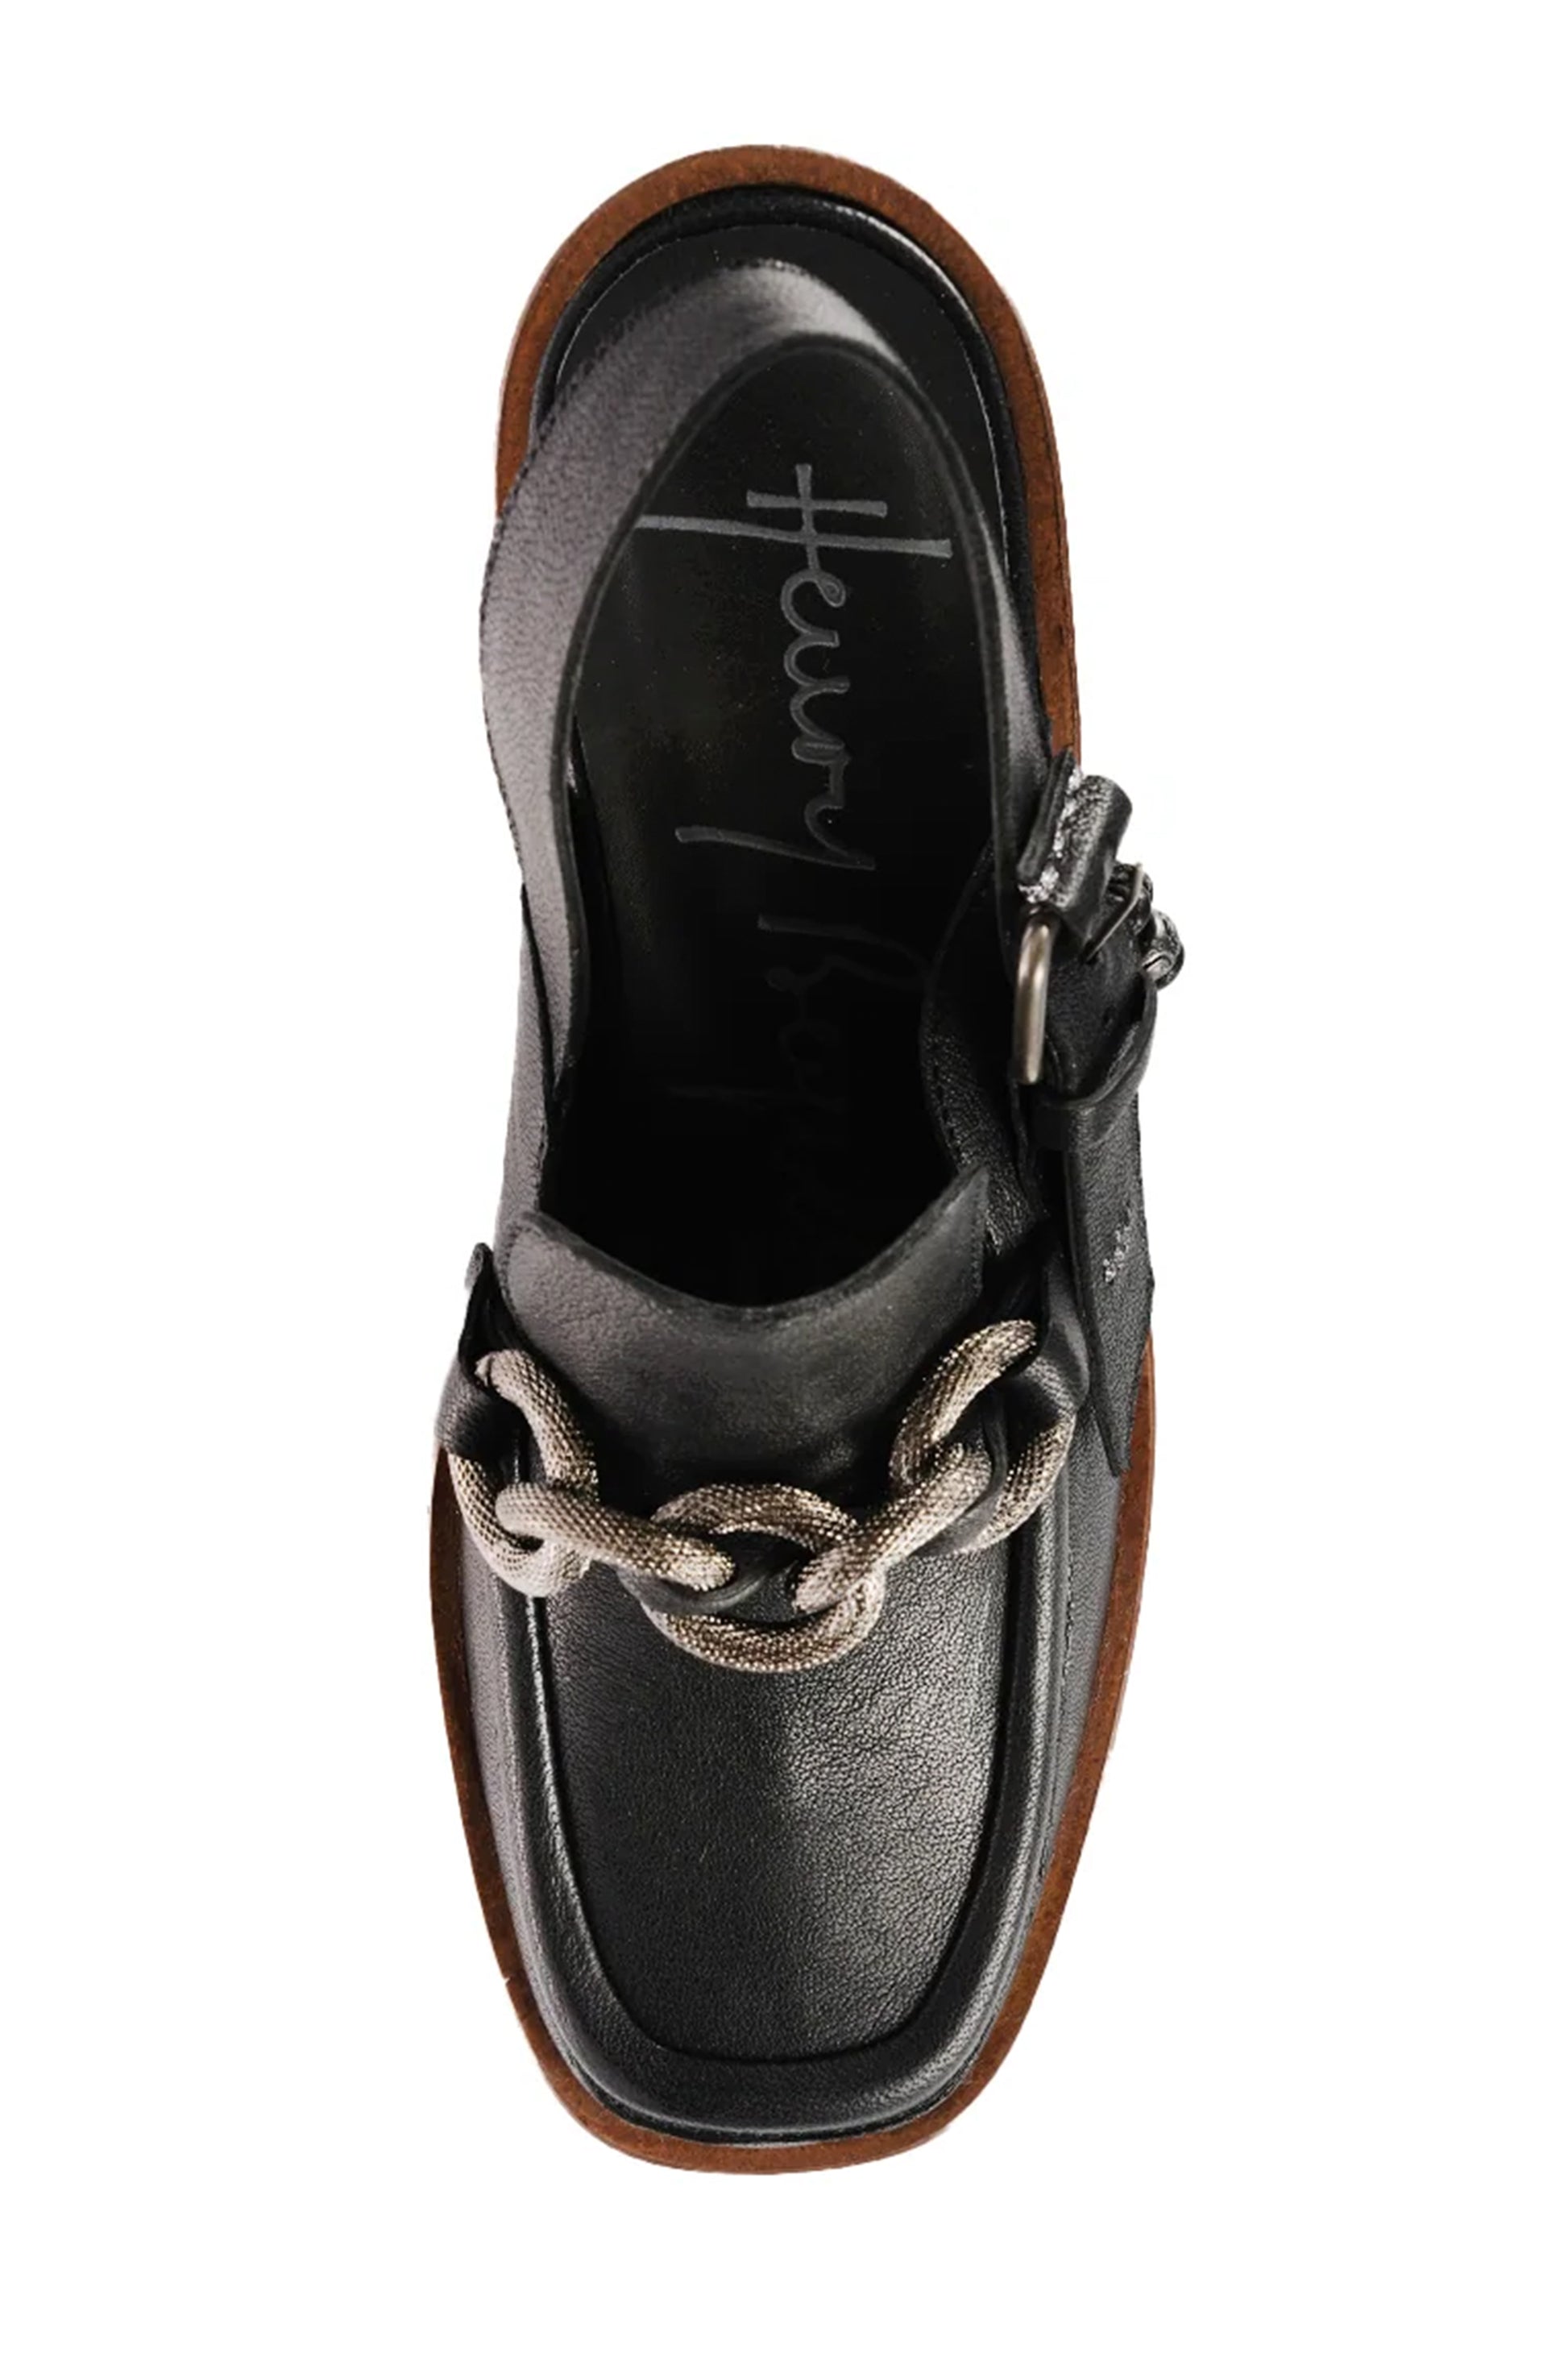 HENRY BEGUELIN Leather Platform Moccasin Shoe in Old Iron Nero